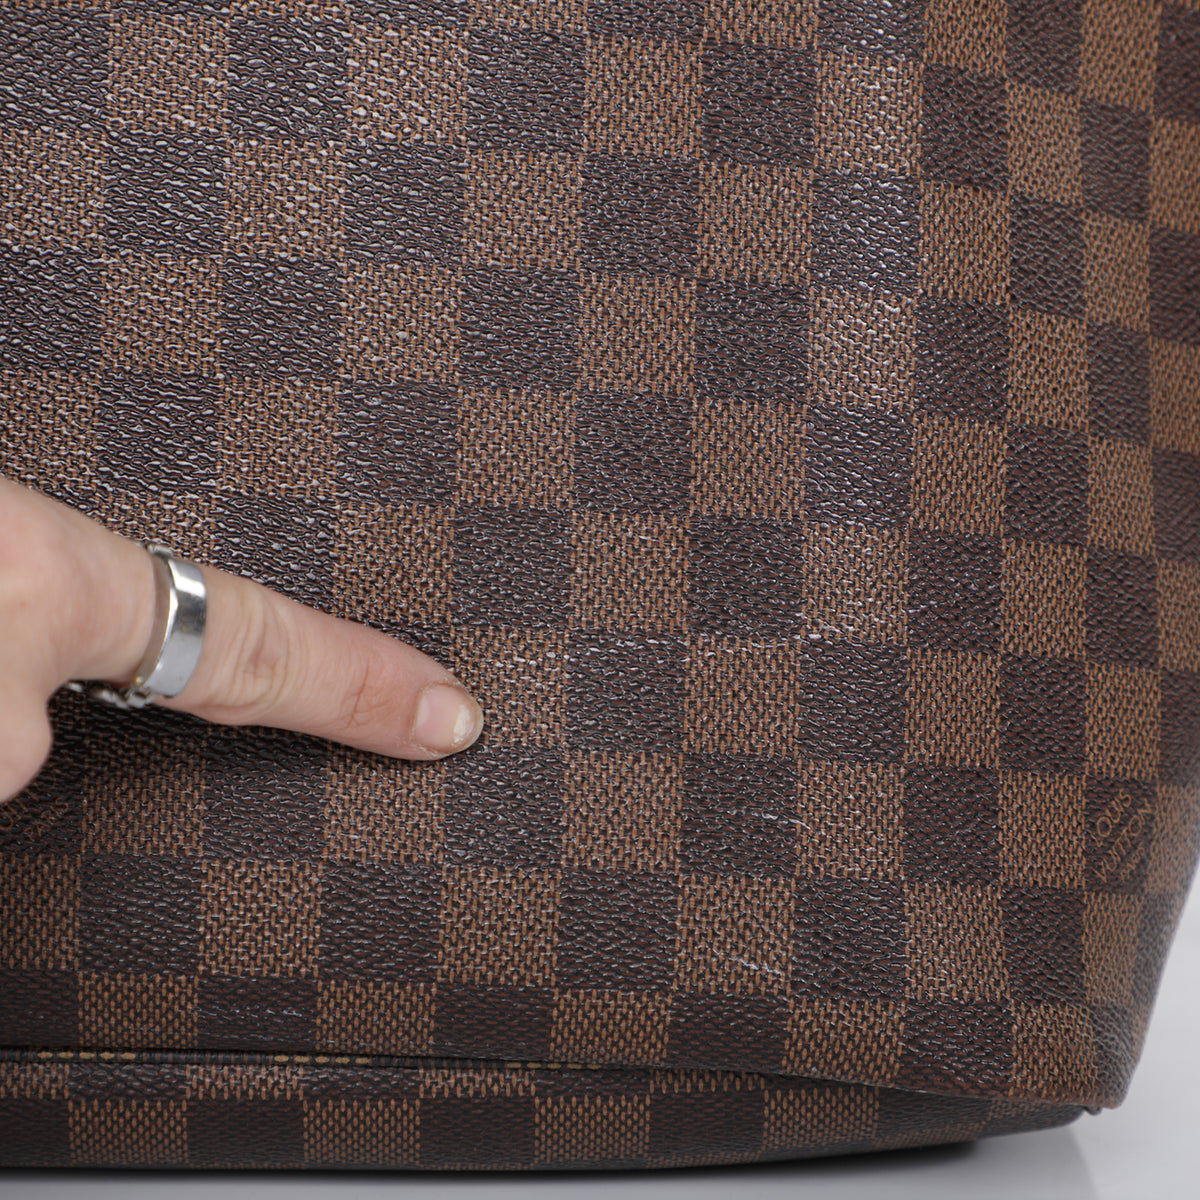 Louis Vuitton Neverfull: To Discontinue or Not to Discontinue